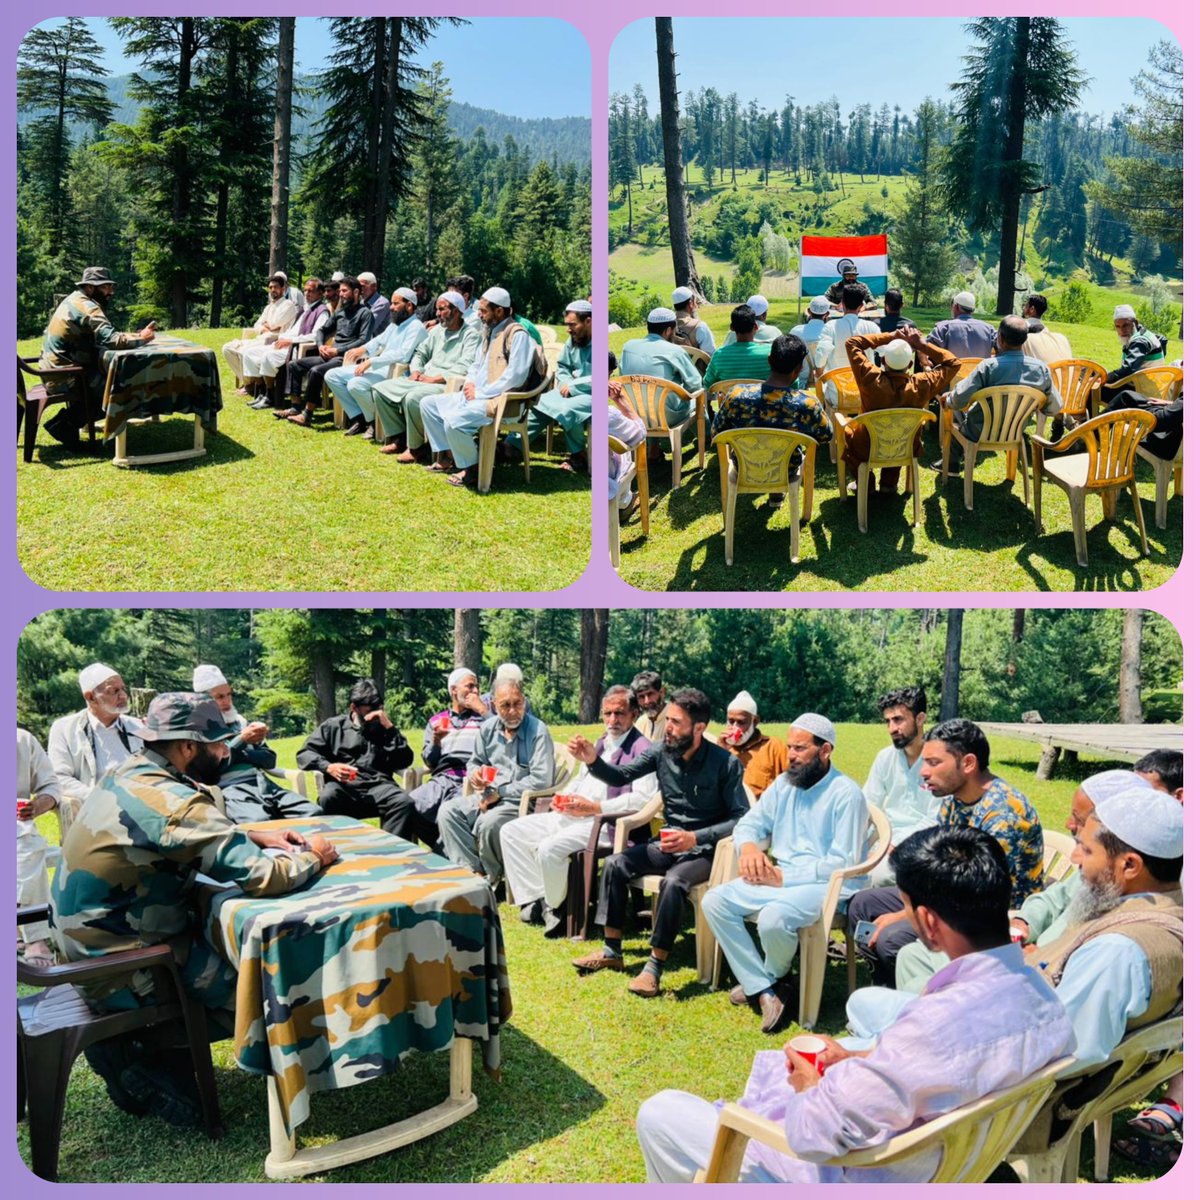 𝗖𝗛𝗔𝗜 𝗣𝗘 𝗖𝗛𝗔𝗥𝗖𝗛𝗔. Yamrad Army Camp conducted an engagement with the Ward Members, Sarpanches, and Govt Employees of the villages in an effort to strengthen ties between the local community and security personnel.
#kashmir
#chaipecharcha